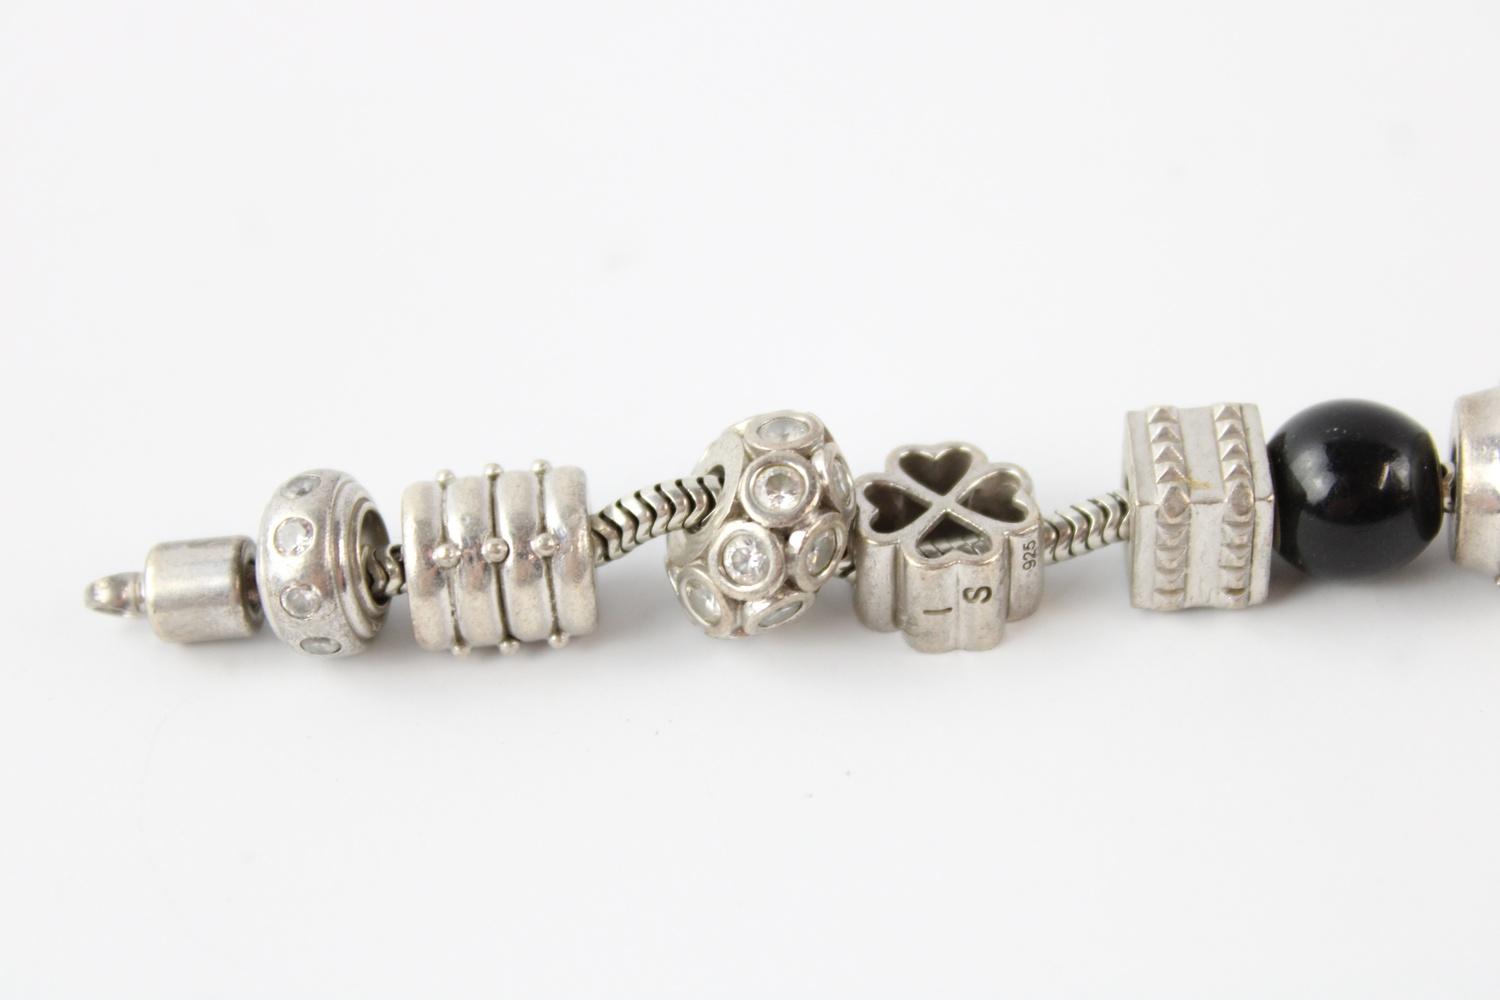 .925 Sterling silver bracelet w/ 13 bead charms - Image 2 of 2